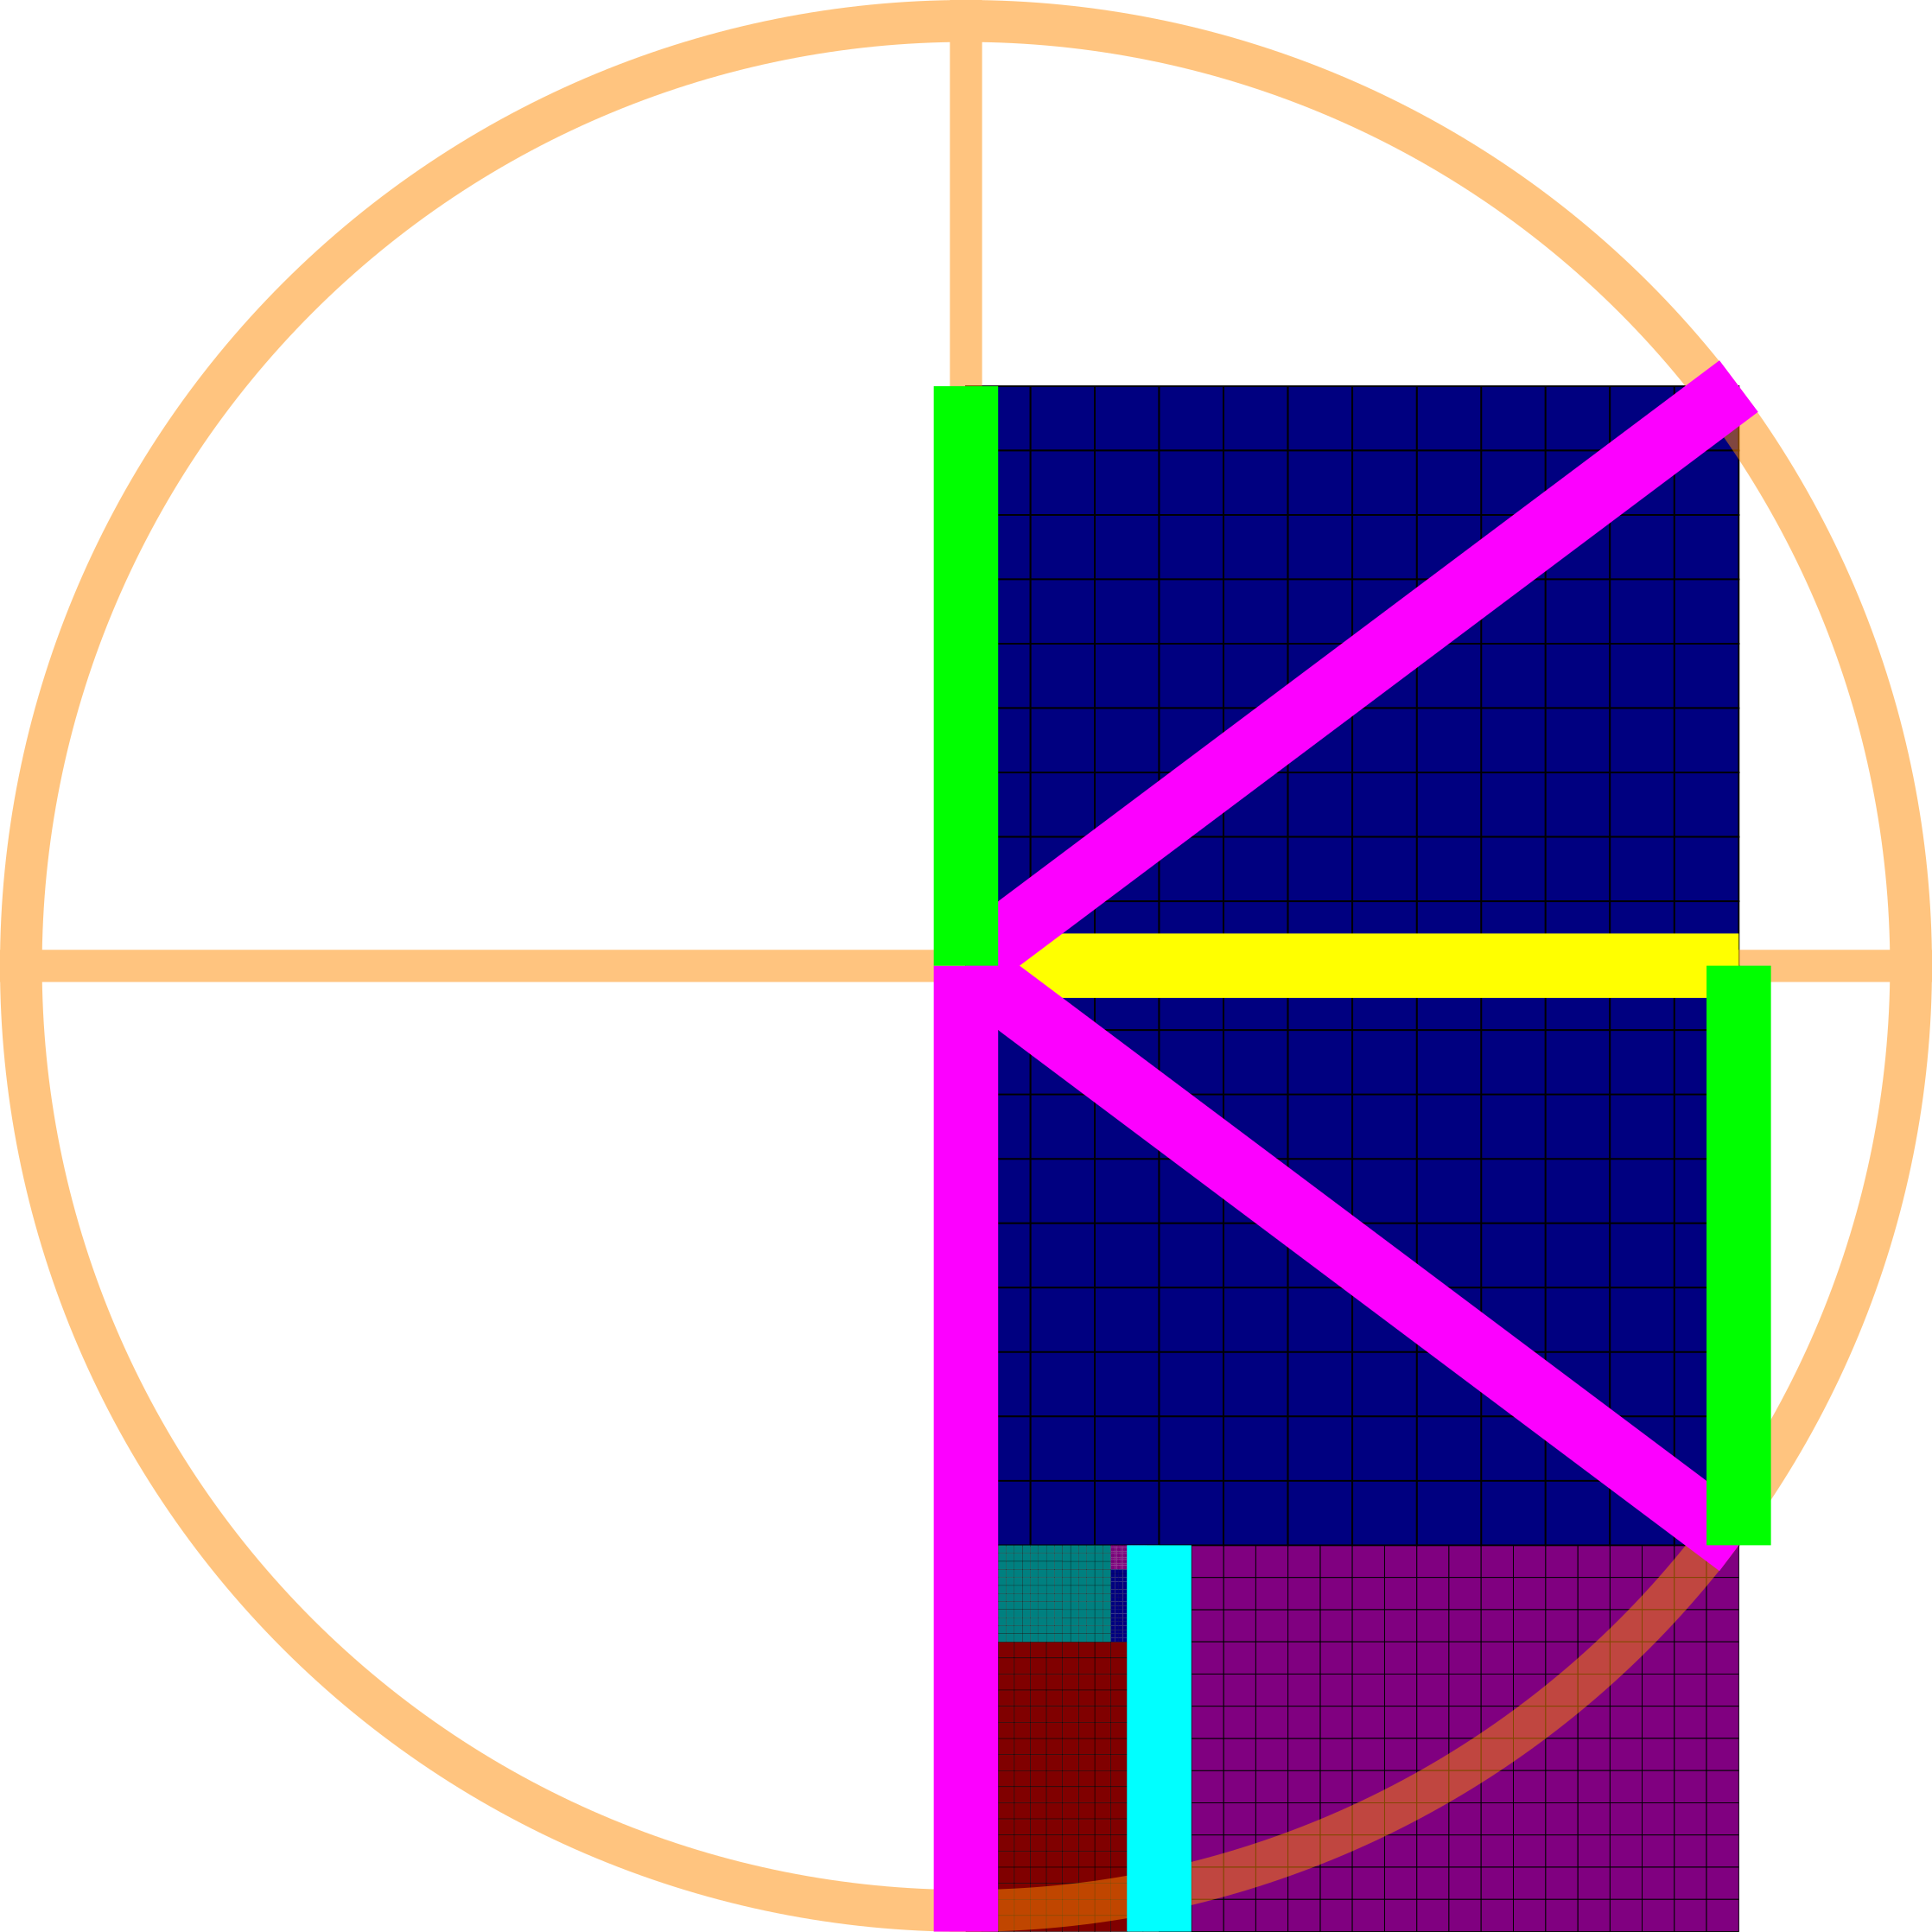 A "rational" (c-b)/a method, with Pythagorean measures and a unit circle superimposed.